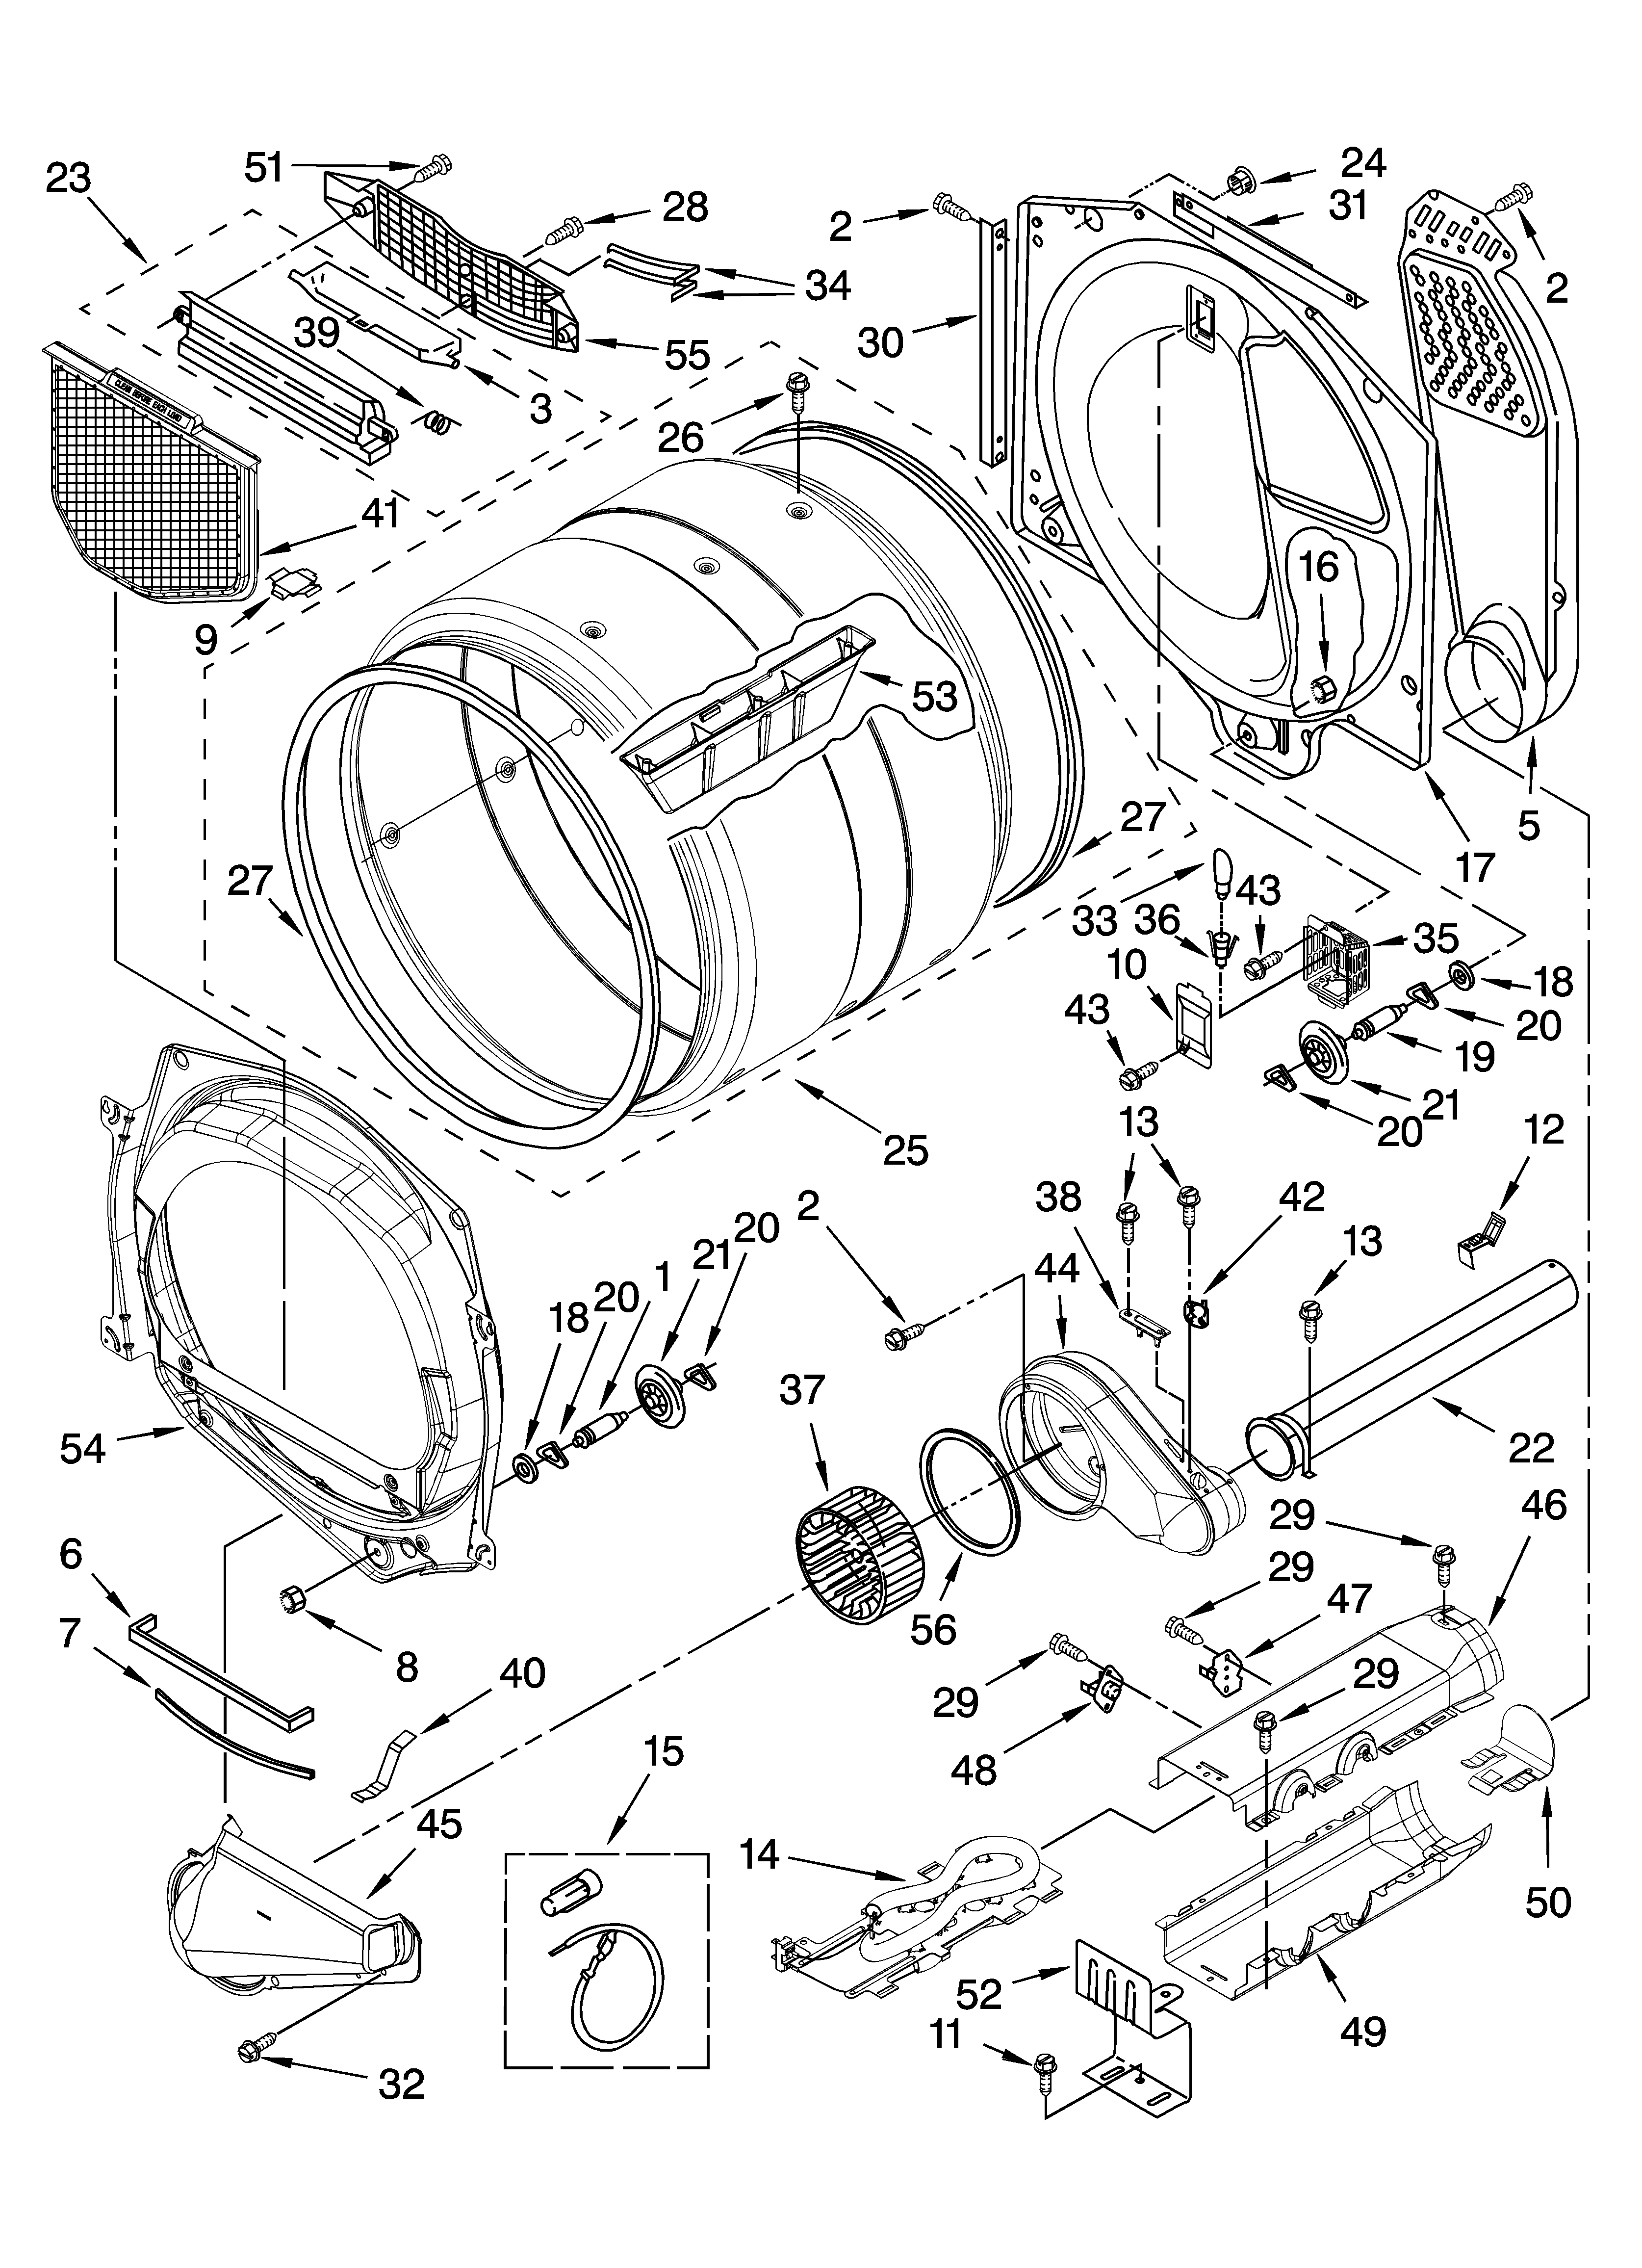 Whirlpool Dryer Plug Wiring Diagram from c.searspartsdirect.com